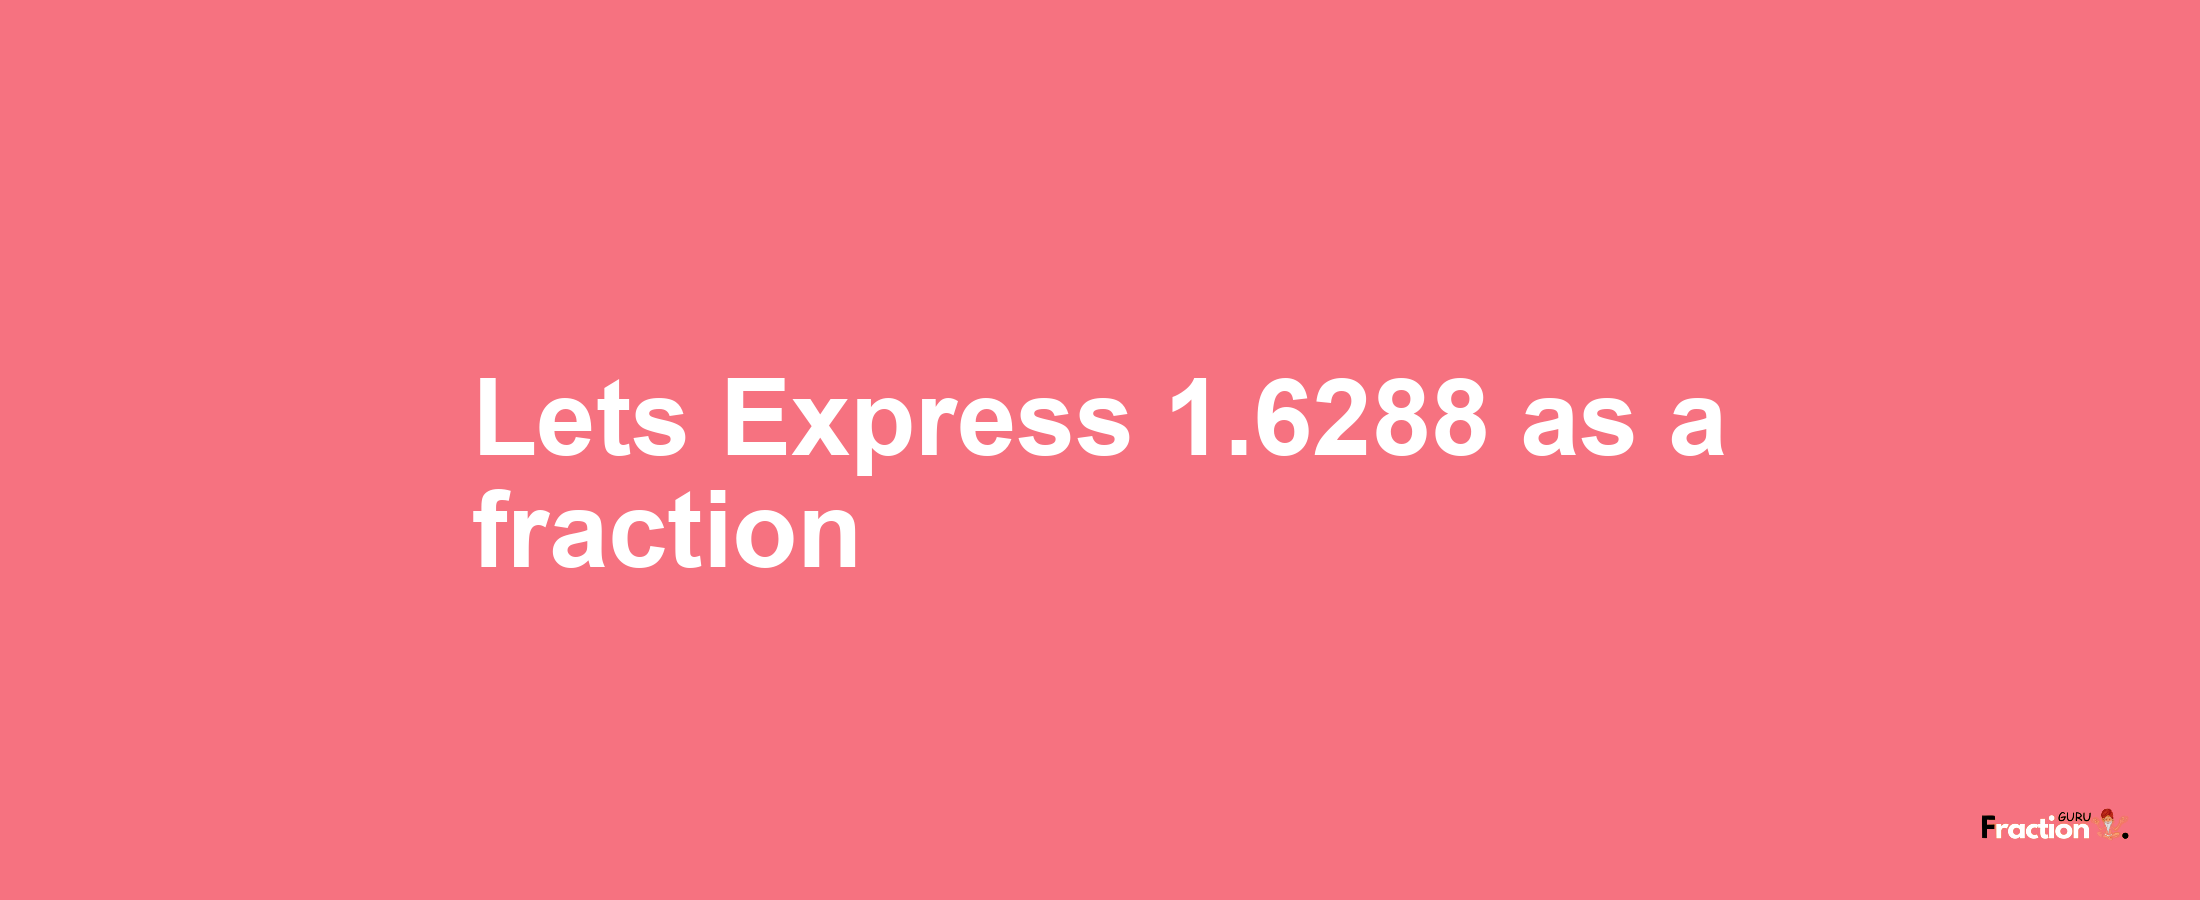 Lets Express 1.6288 as afraction